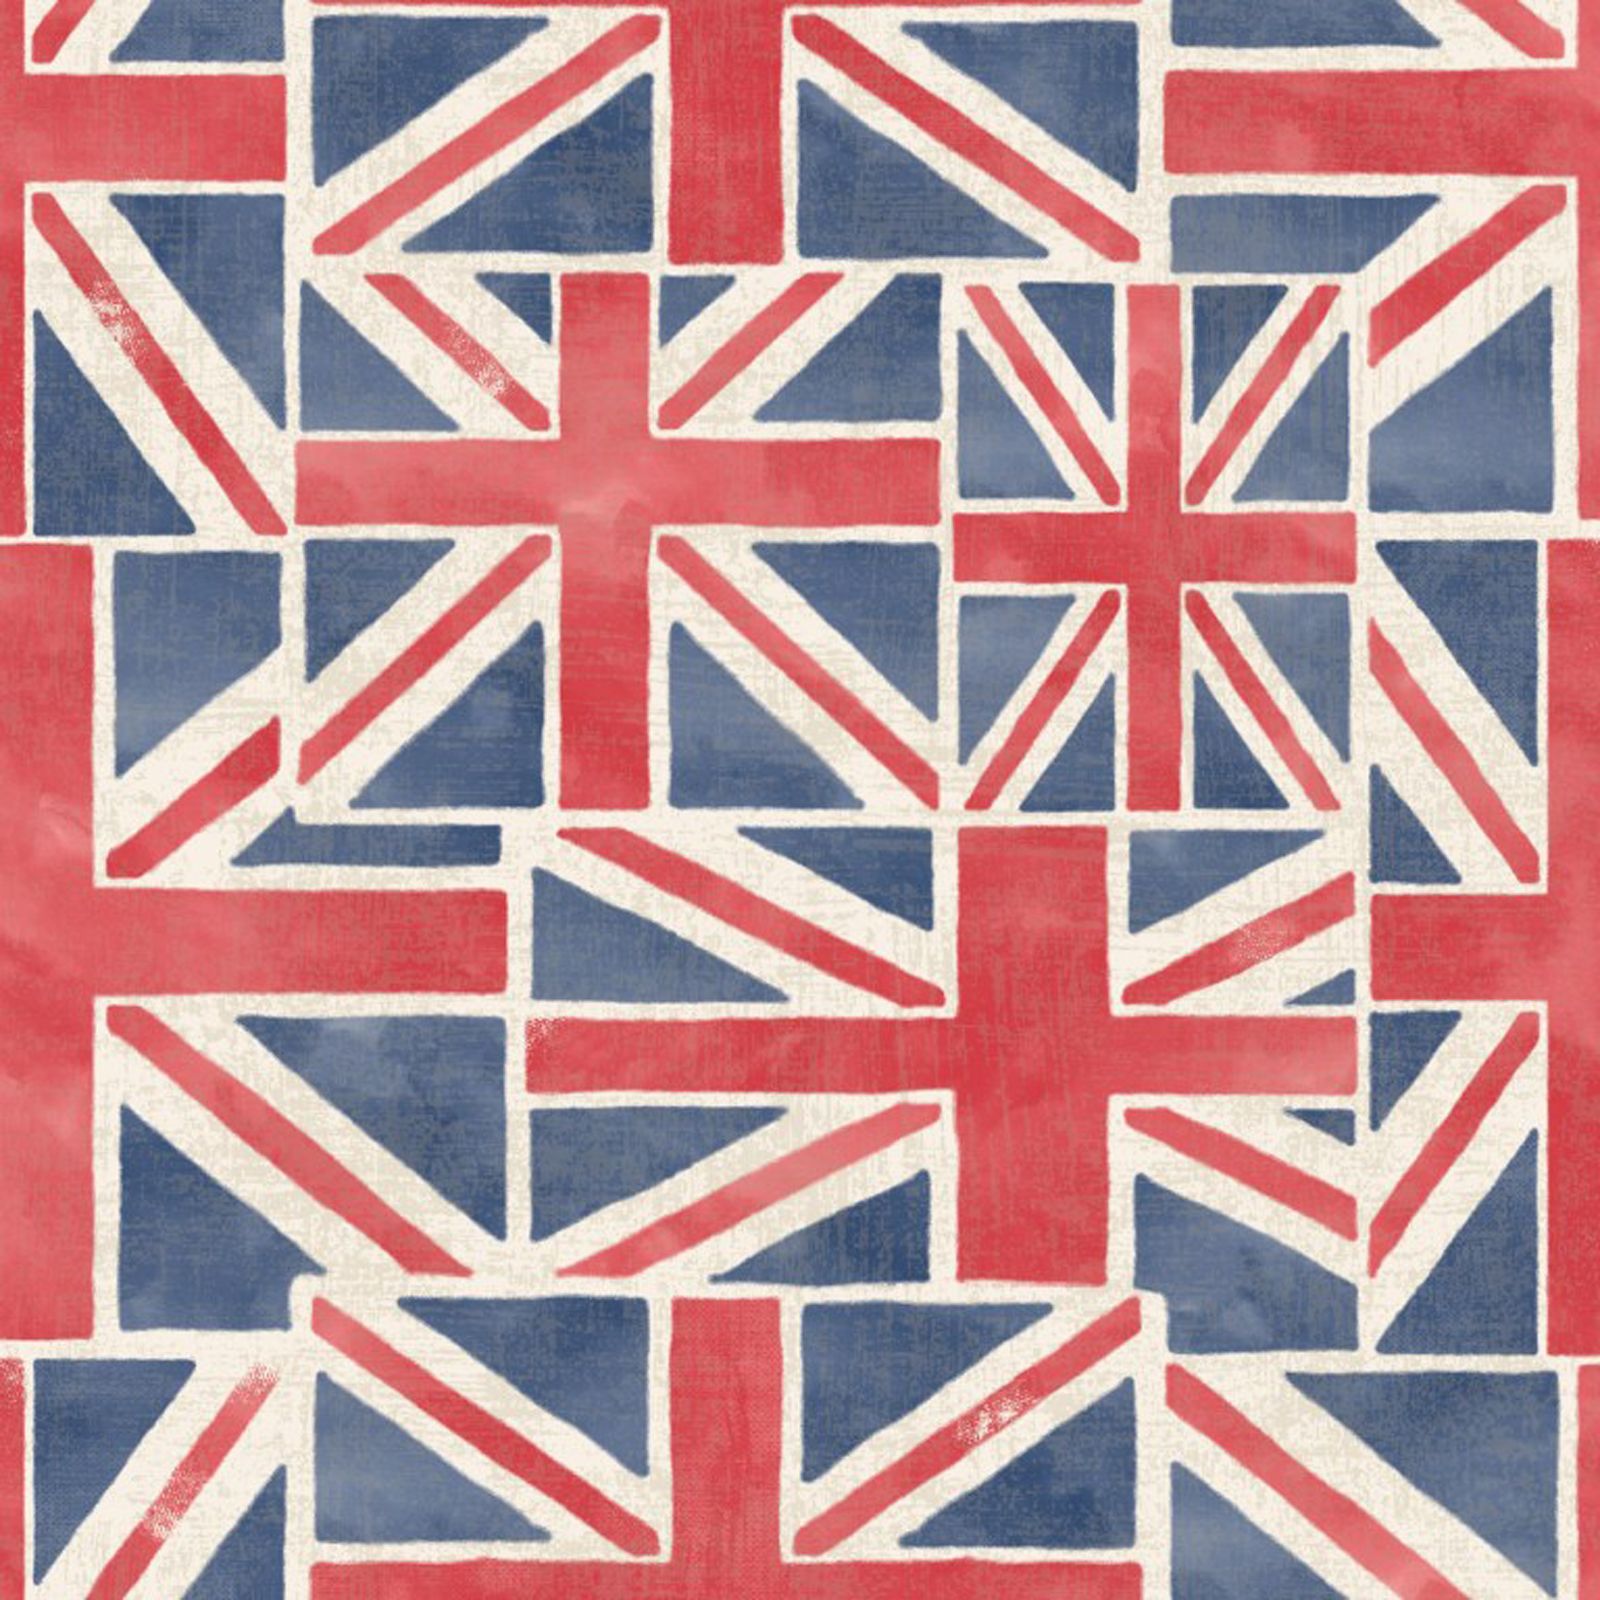 Union Jack Wallpaper 10m New Feature Wall British Flag